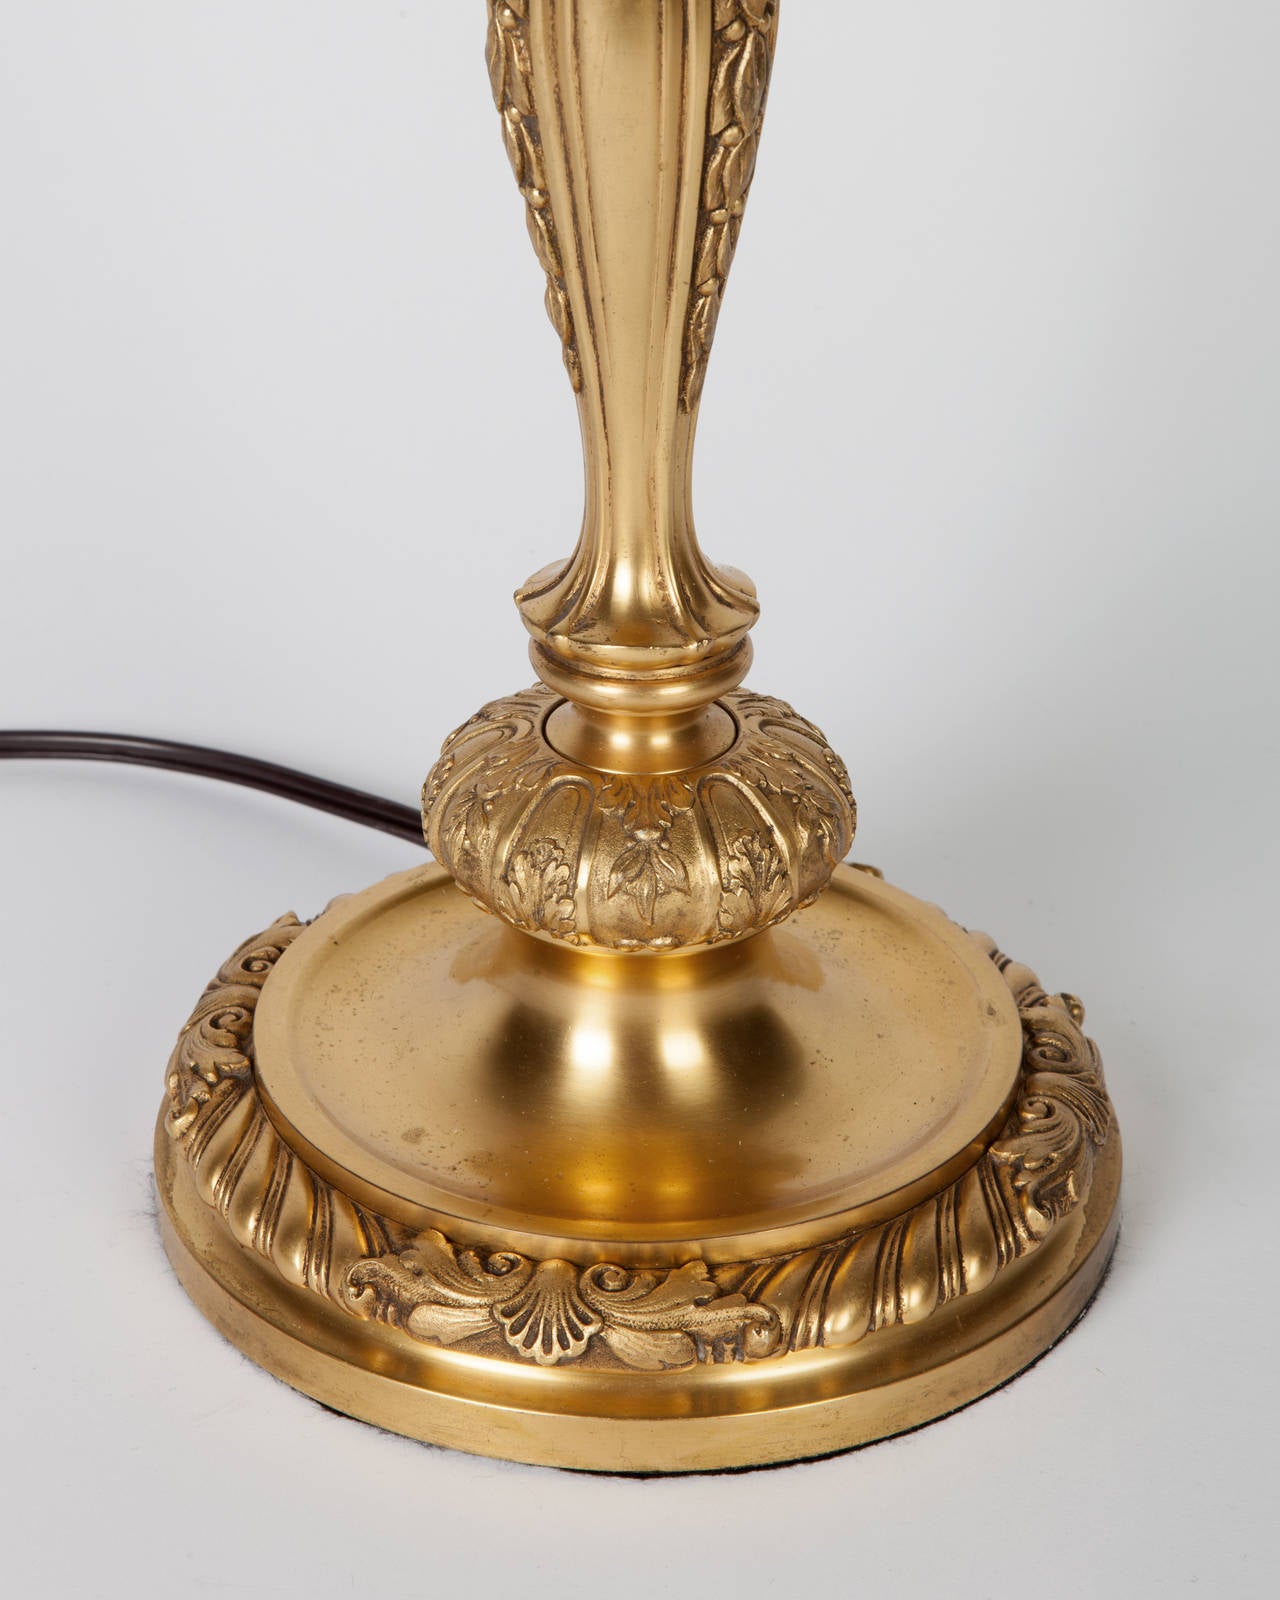 Gilt Gilded Baluster Form Lamp with Bellflowers Signed by Sterling Bronze, c. 1910s For Sale